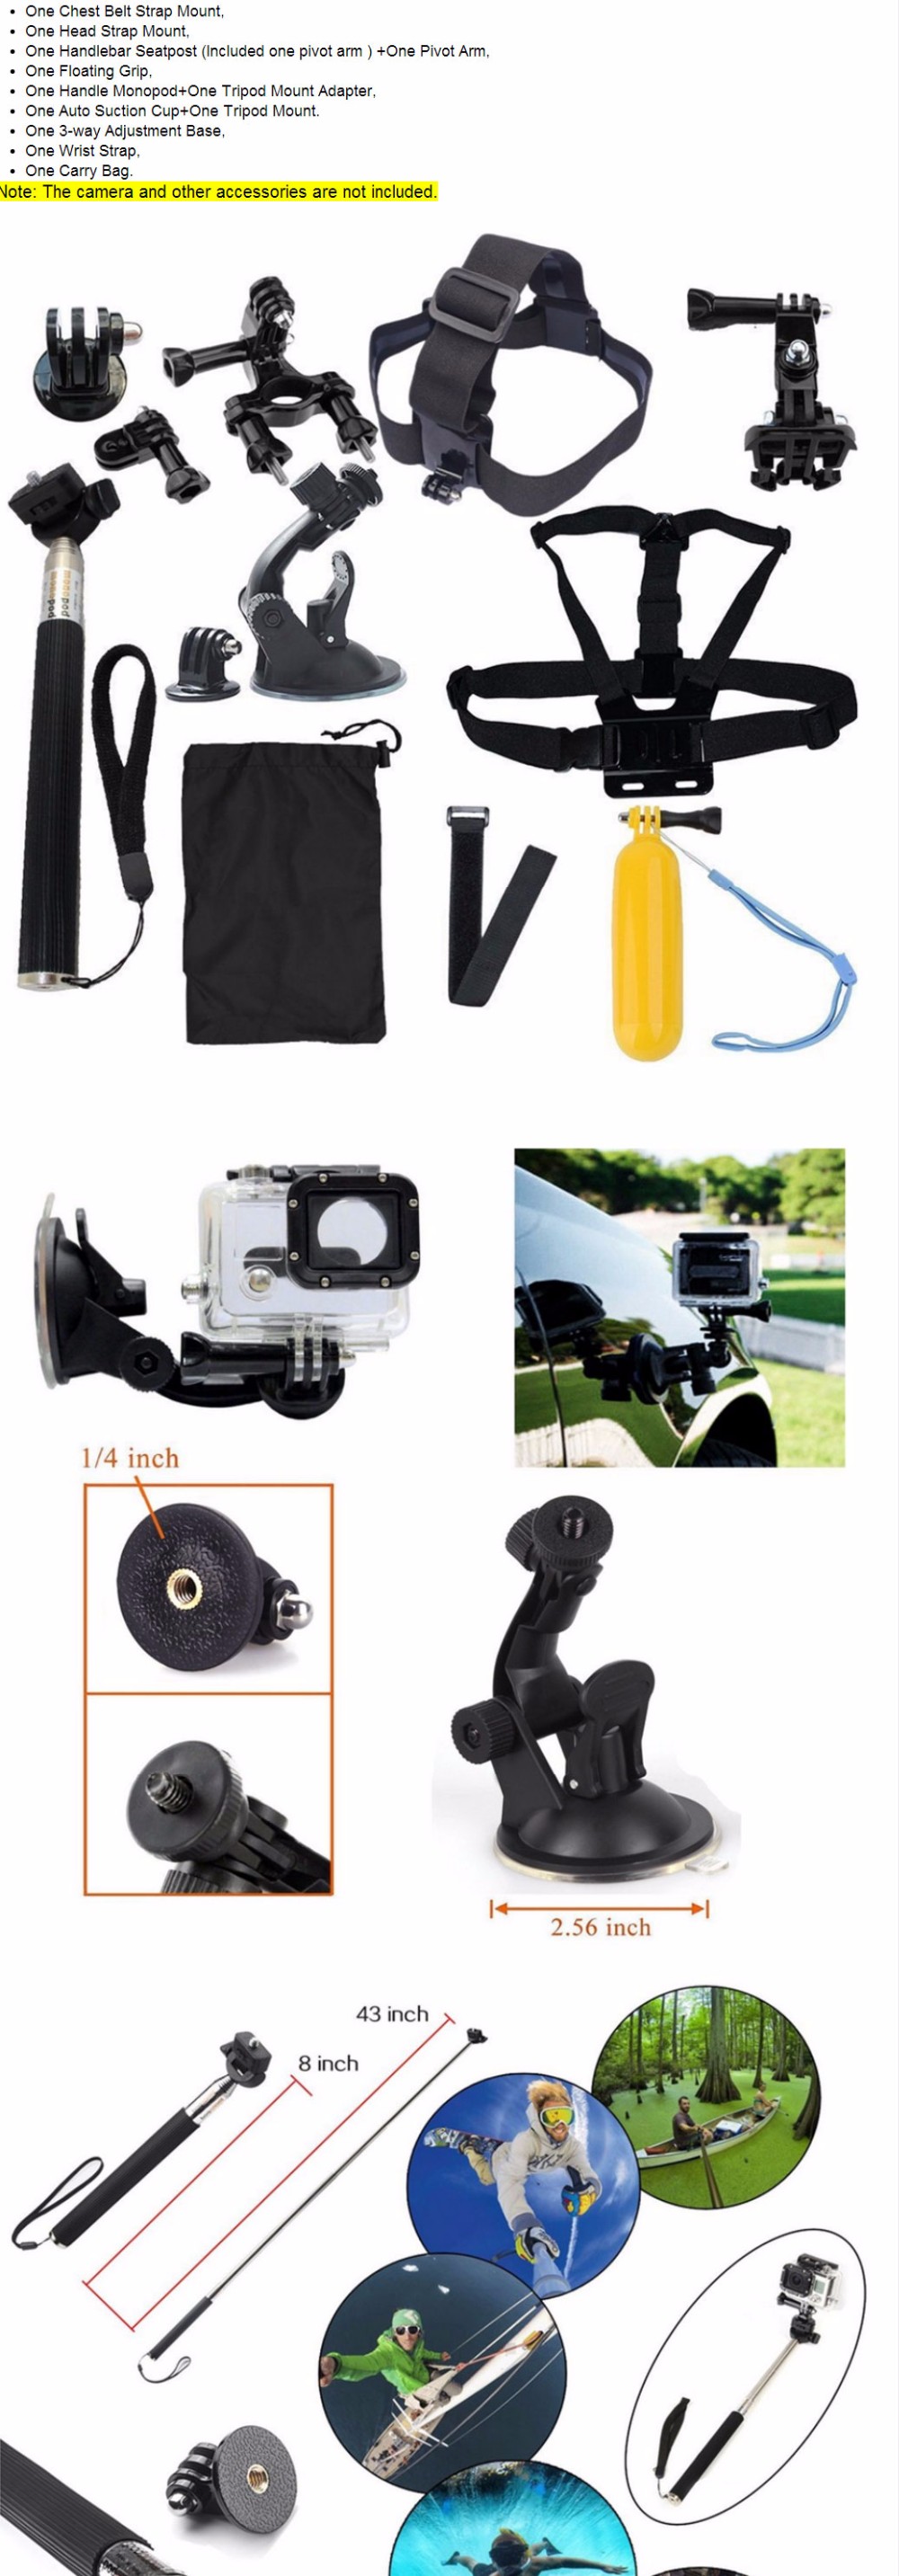 GoPro-Accessories-13-In-1-Family-Kit-Go-Pro-SJ4000-SJ5000-SJ6000-Accessories-Set-Package-For-(1)_01